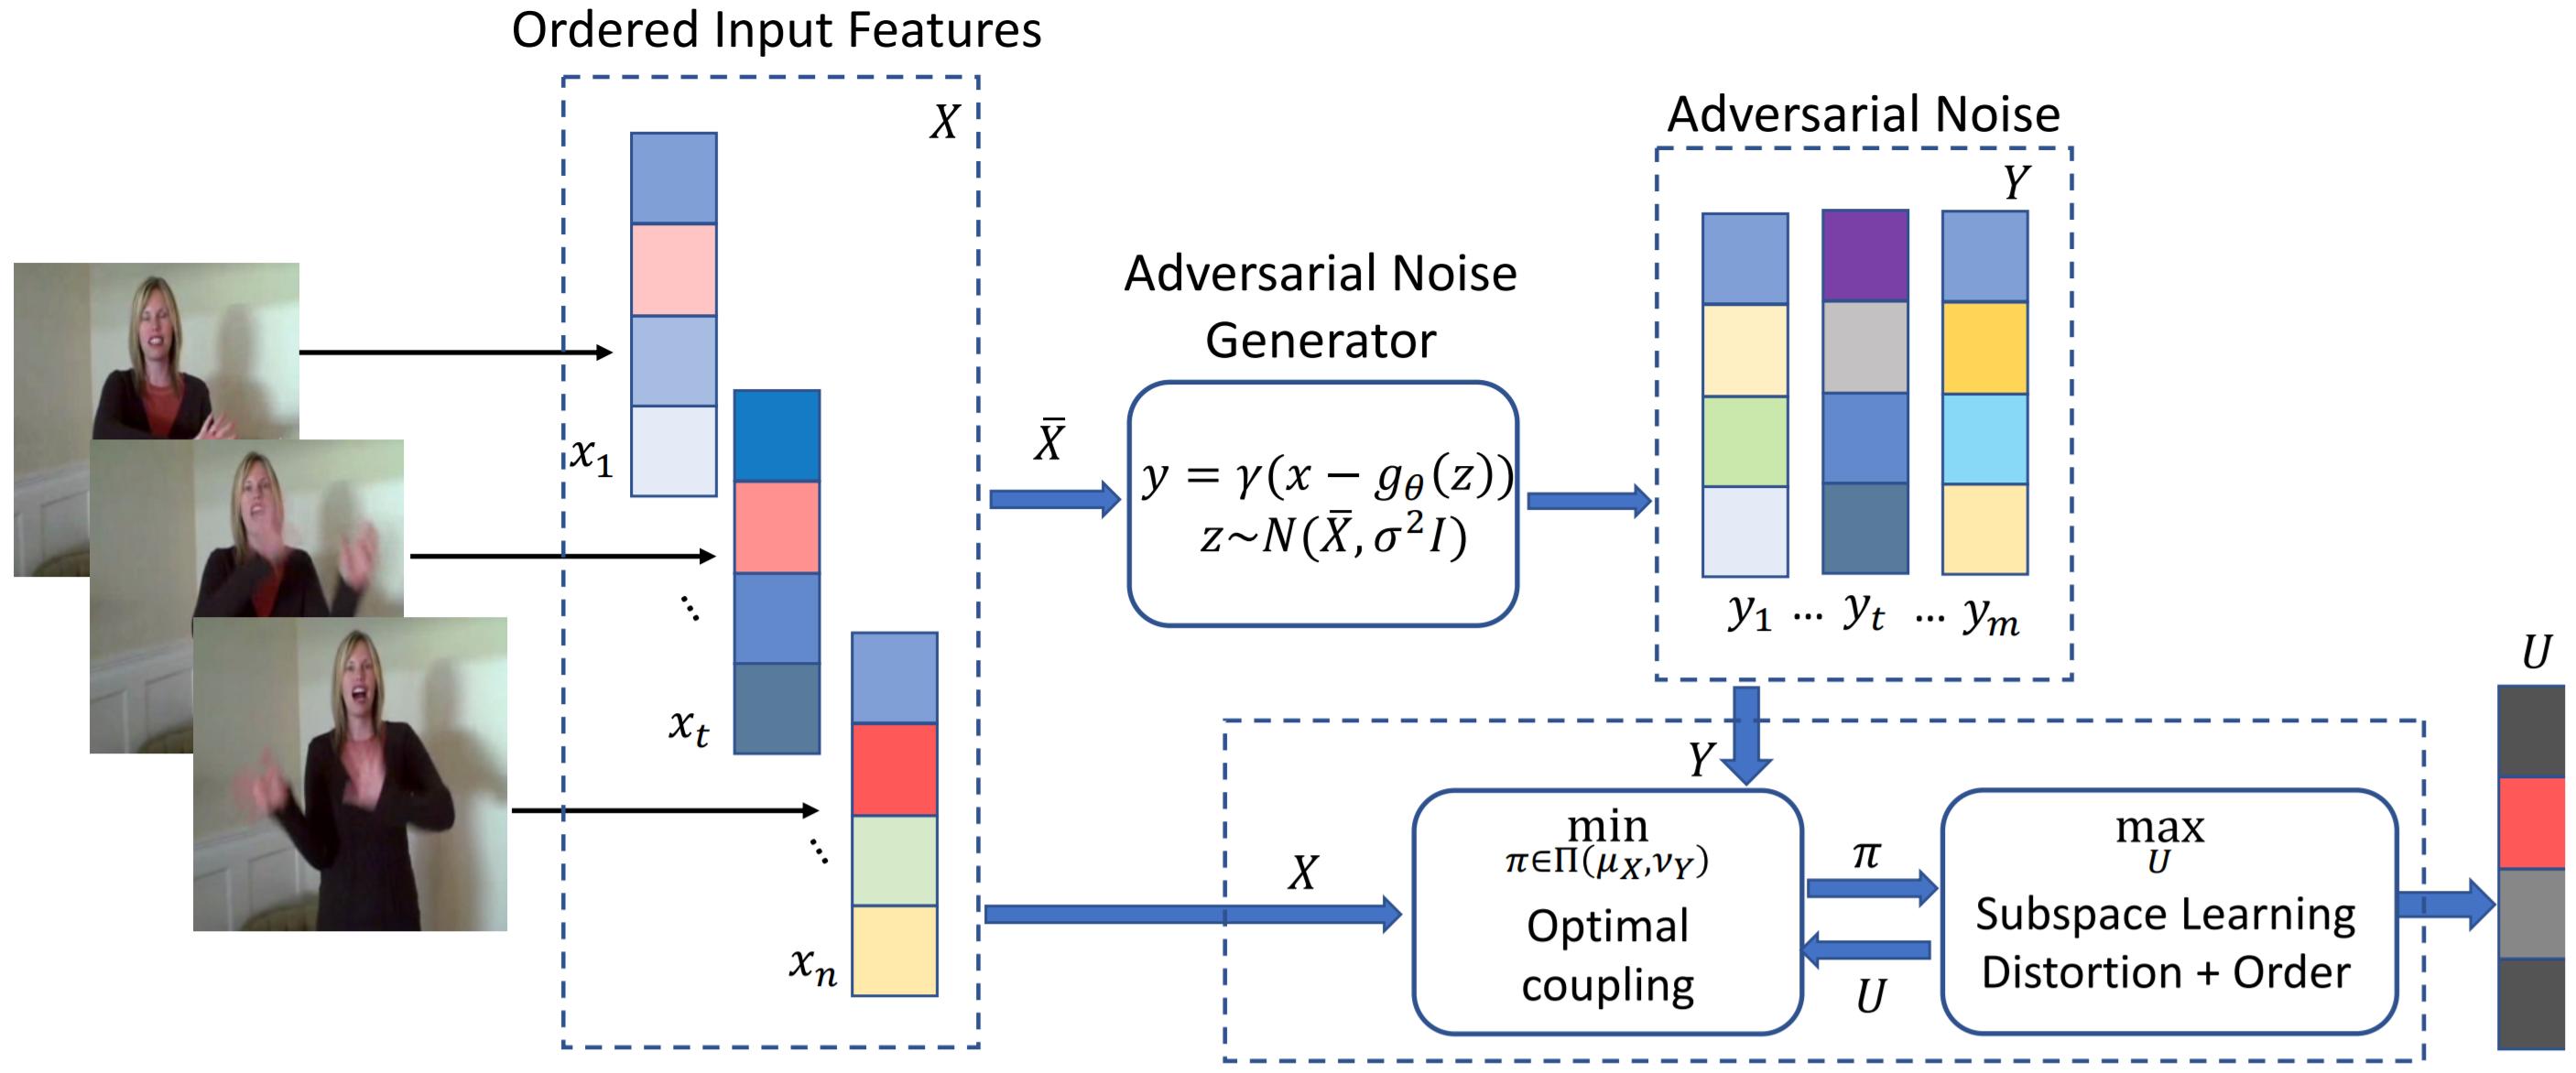 Figure 1: Architecture for contrastive representation learning employing adversarial noise generation (implemented via a Wasserstein GAN) and a joint optimal transport and representation learning formulation.